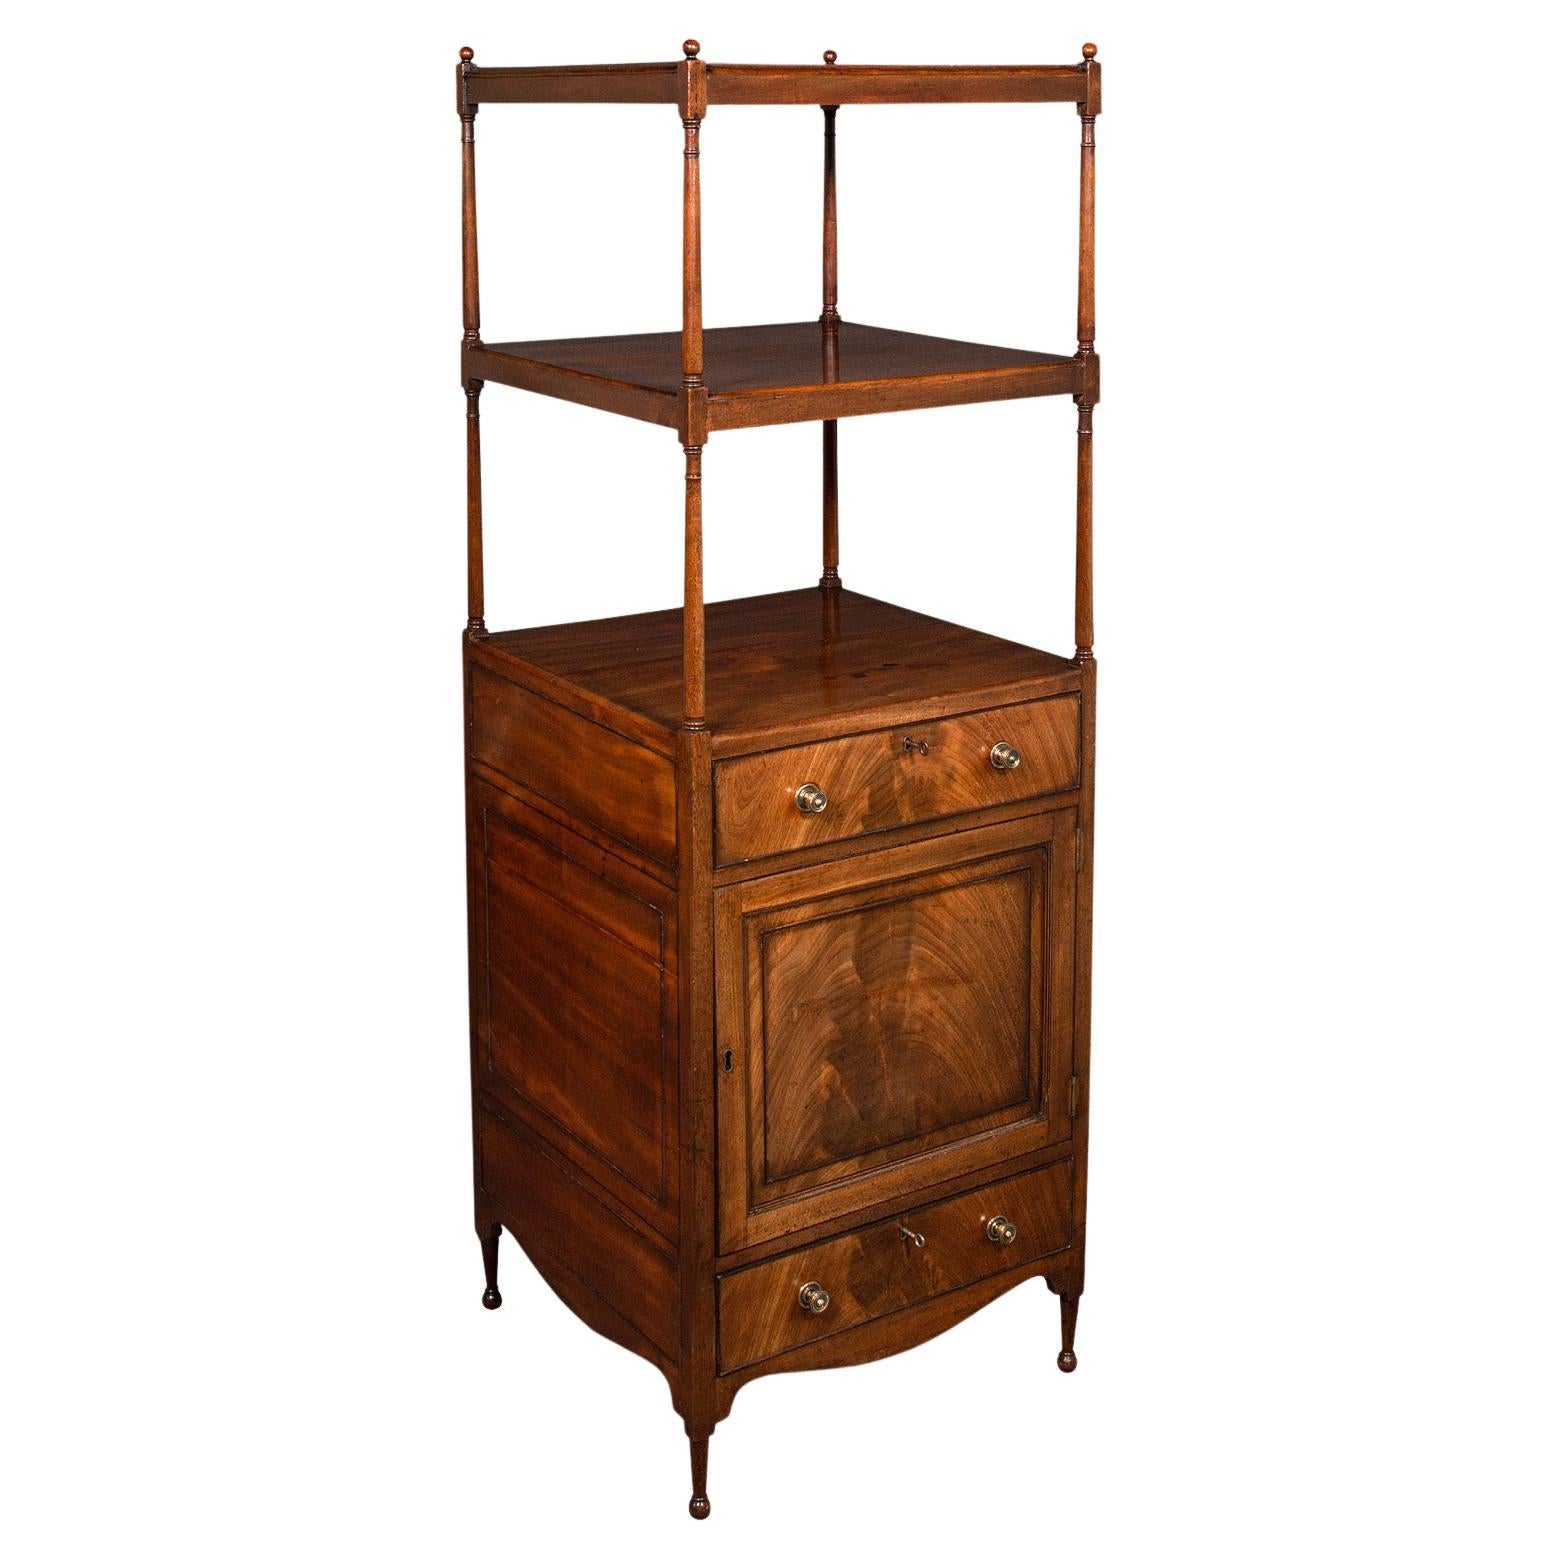 Antique Two Tier Display Stand, English, Whatnot, Cabinet, Victorian, Circa 1860 For Sale